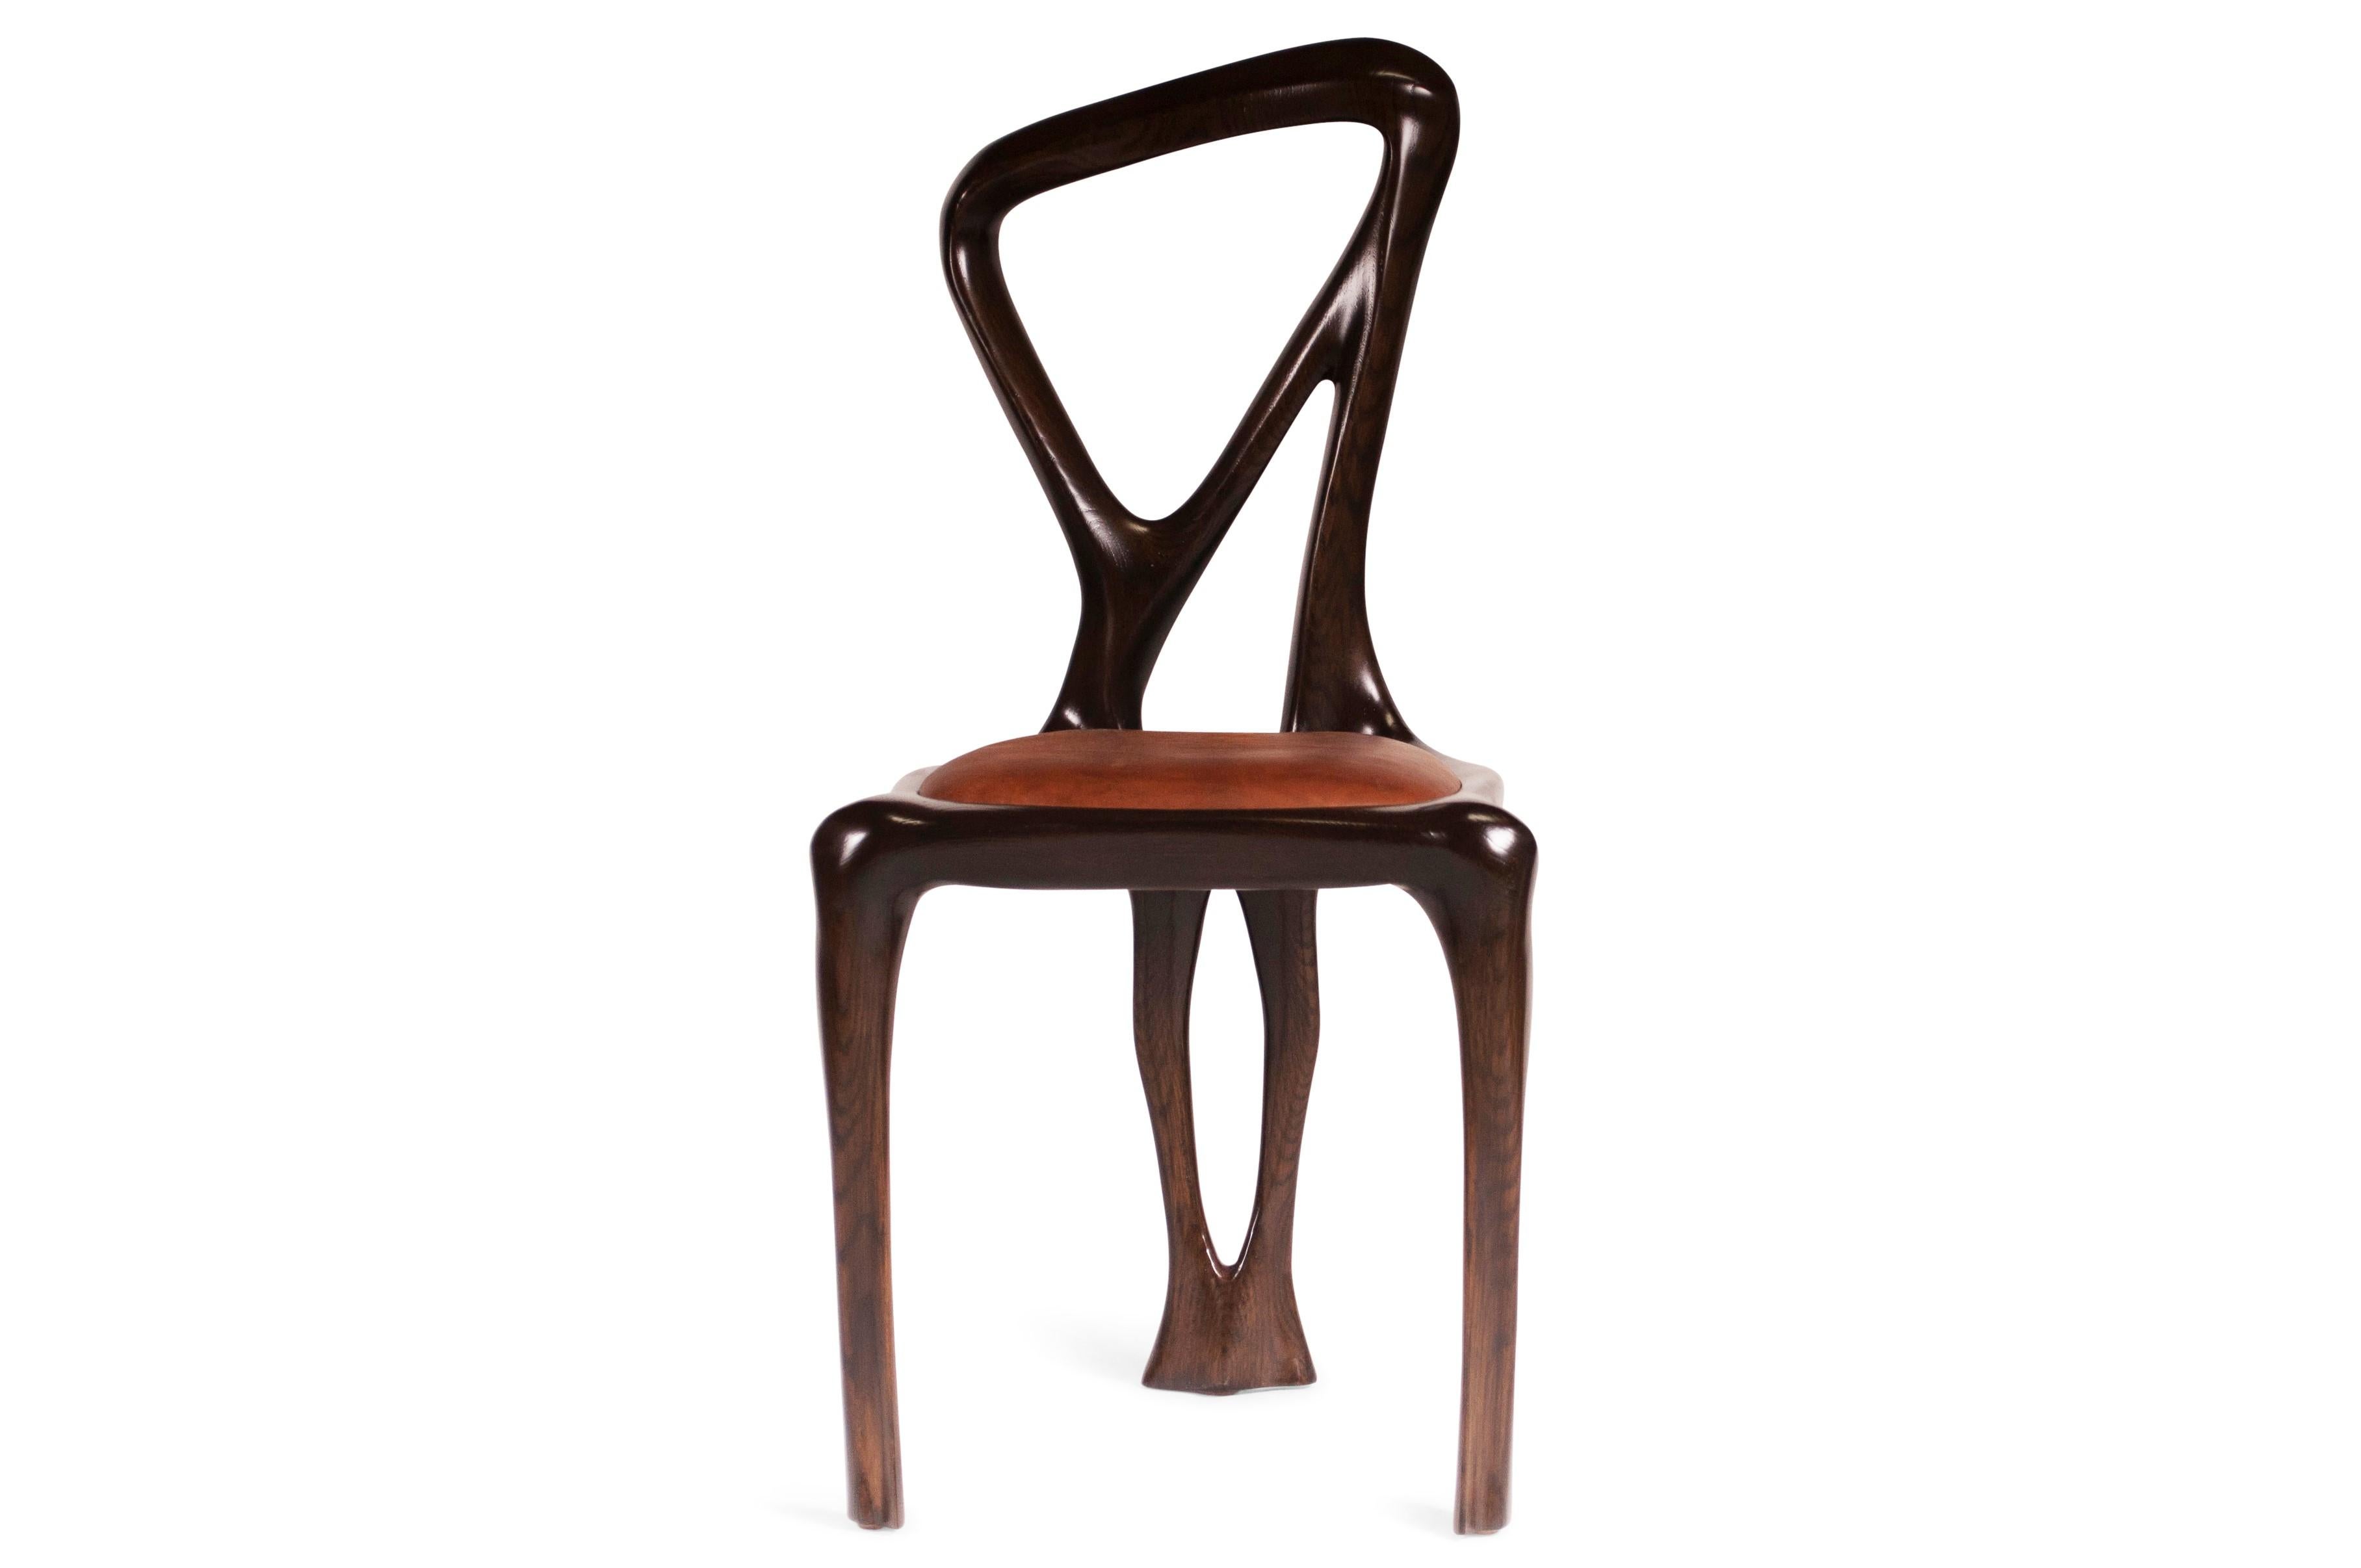 Dining chair designed by Amorph made out of solid ash wood and leather. It is stained dark walnut.
Dimension: 38